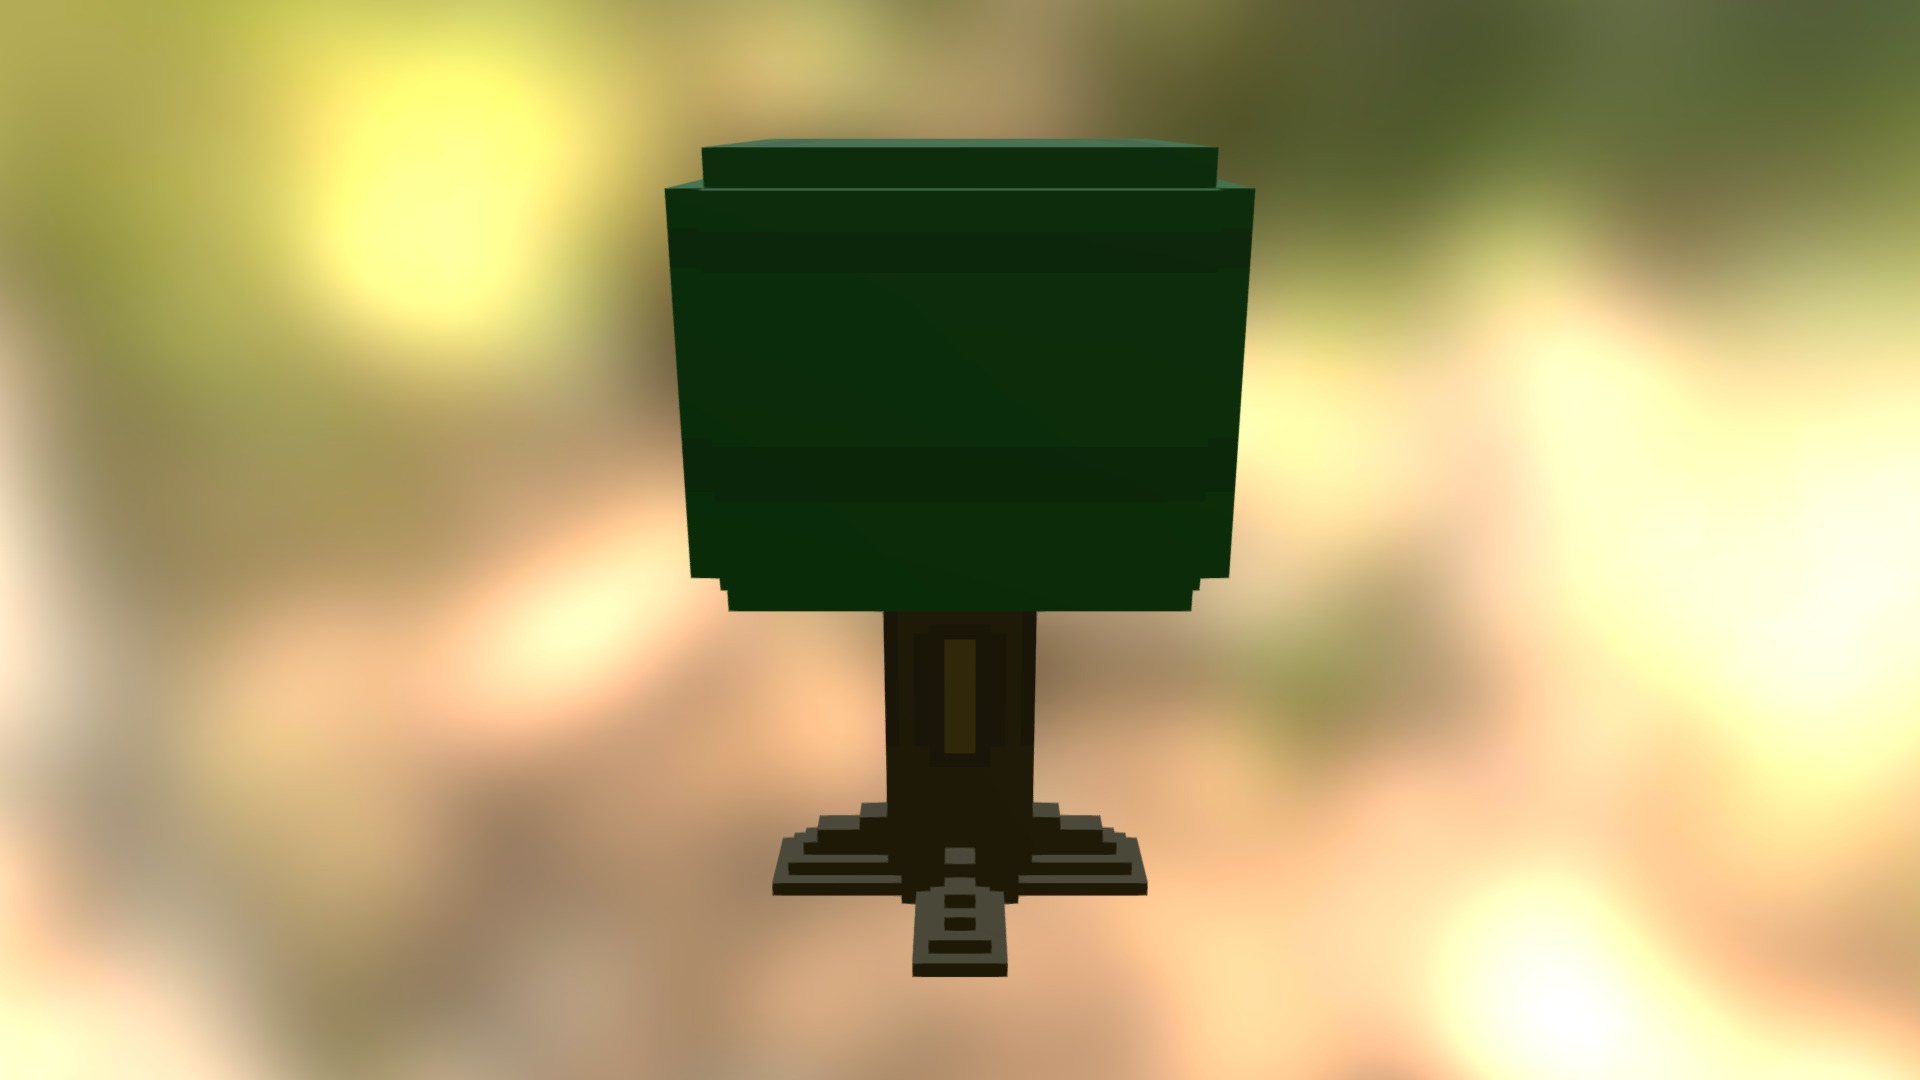 3D model Tree - This is a 3D model of the Tree. The 3D model is about a green lamp with a black base.